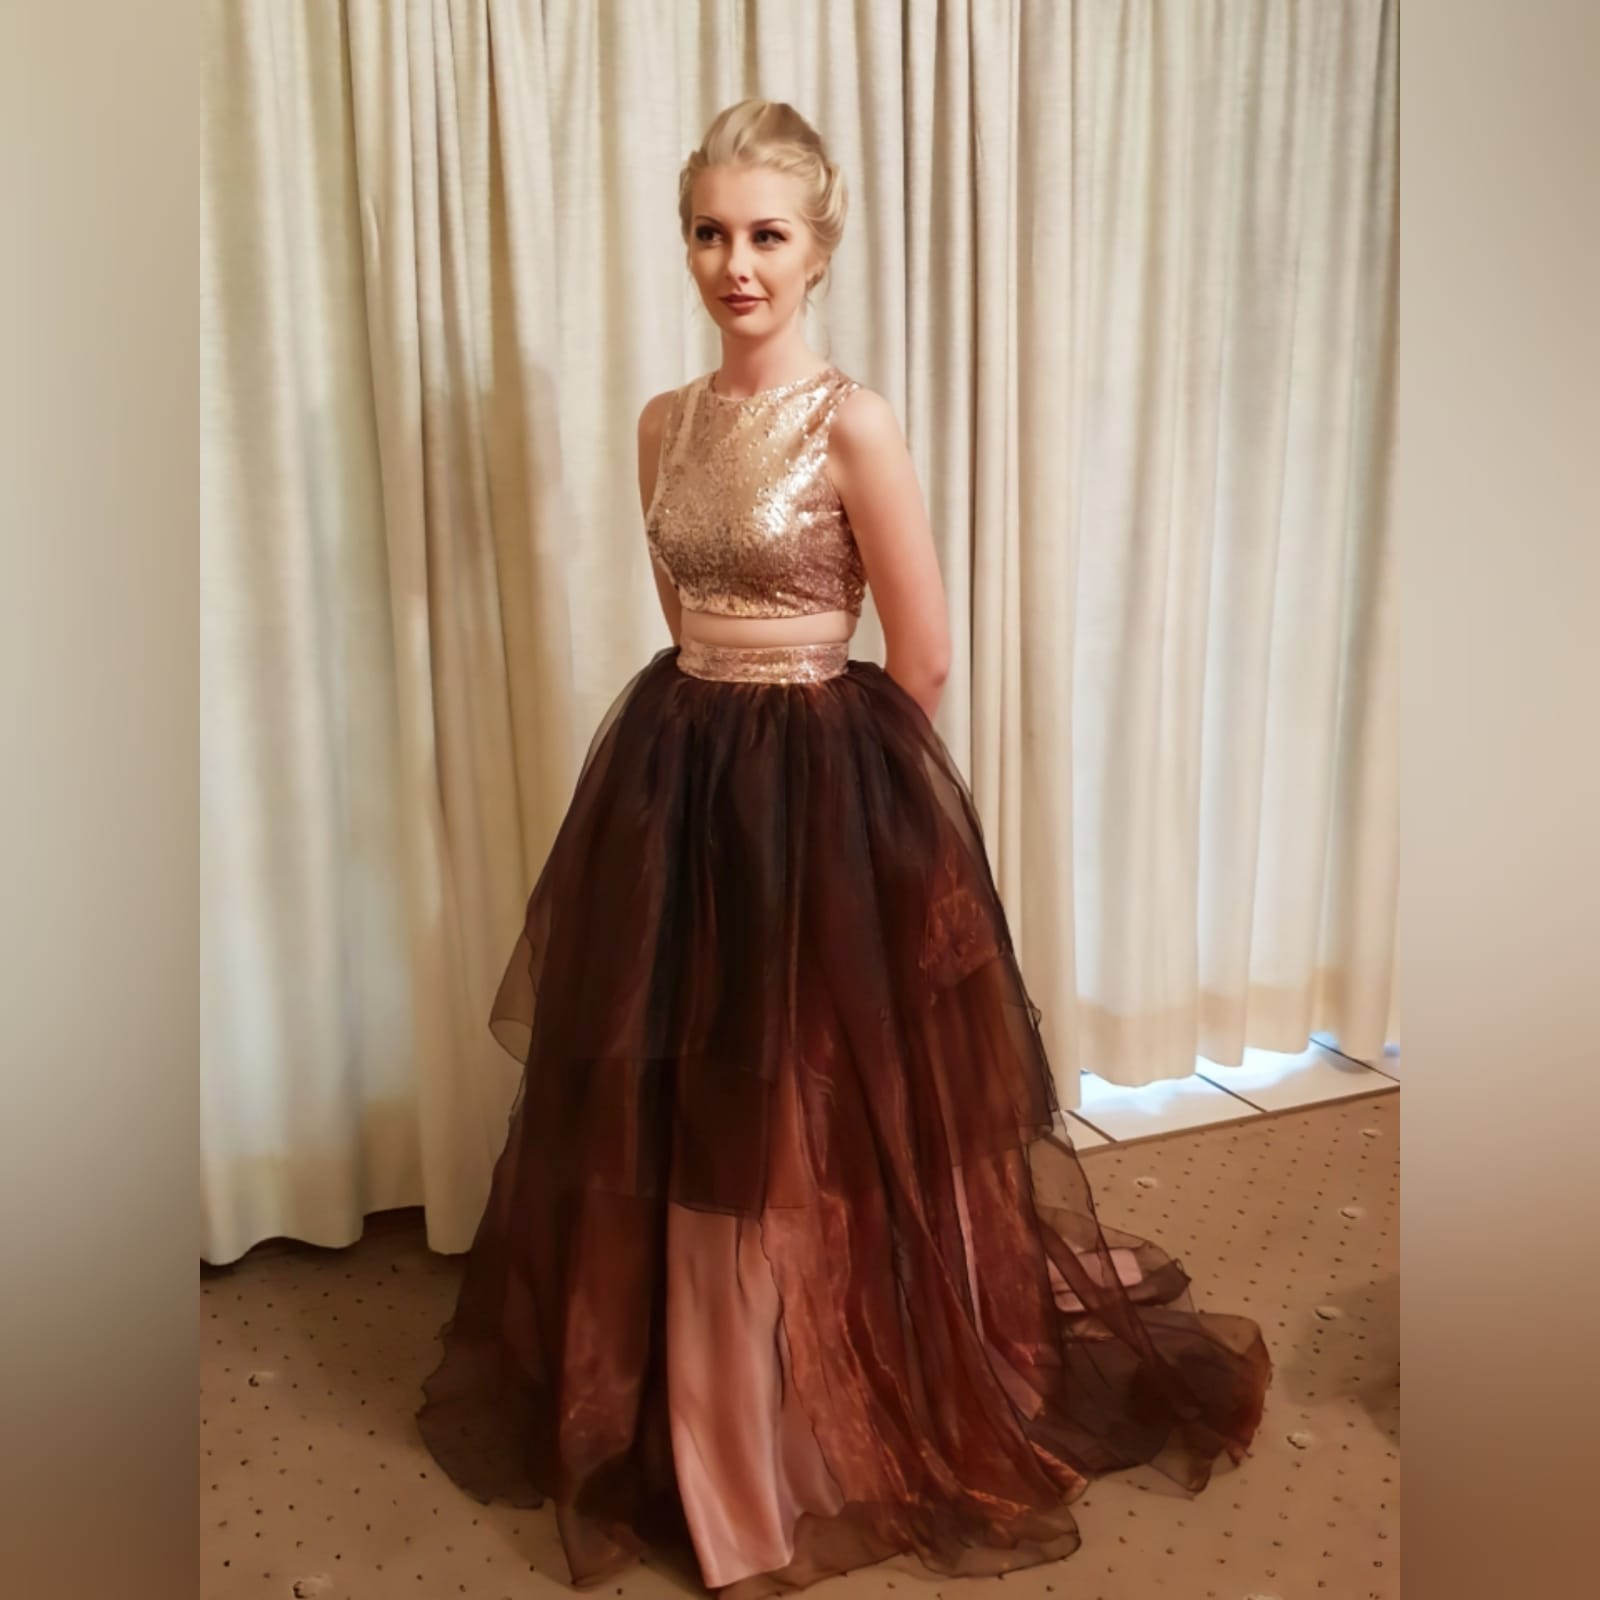 2 piece brown and rose gold prom dress 8 this awesome versatile evening dress was created for a prom dance. 2 piece brown and rose gold prom dress. With a layered organza full skirt and sequins waistband. Crop top in rosegold sequins which can be reused in several other occasions.